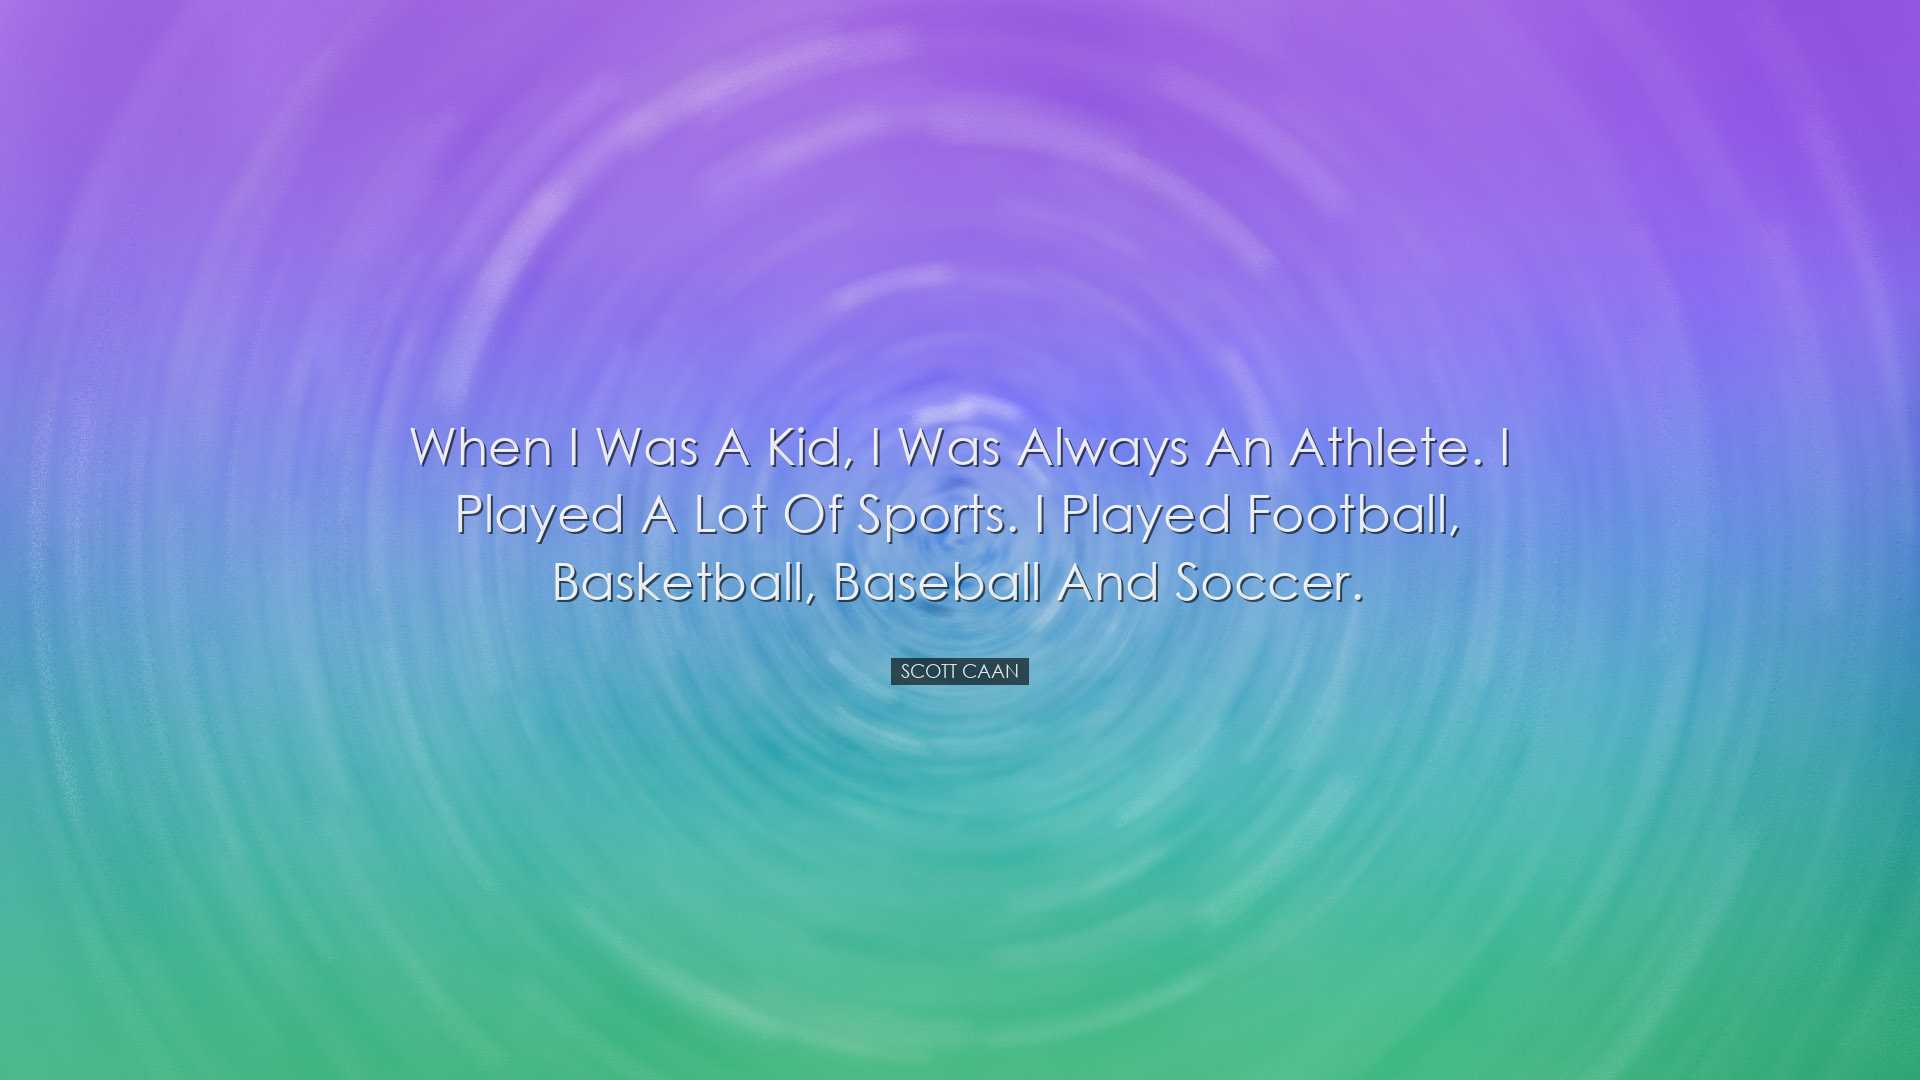 When I was a kid, I was always an athlete. I played a lot of sport